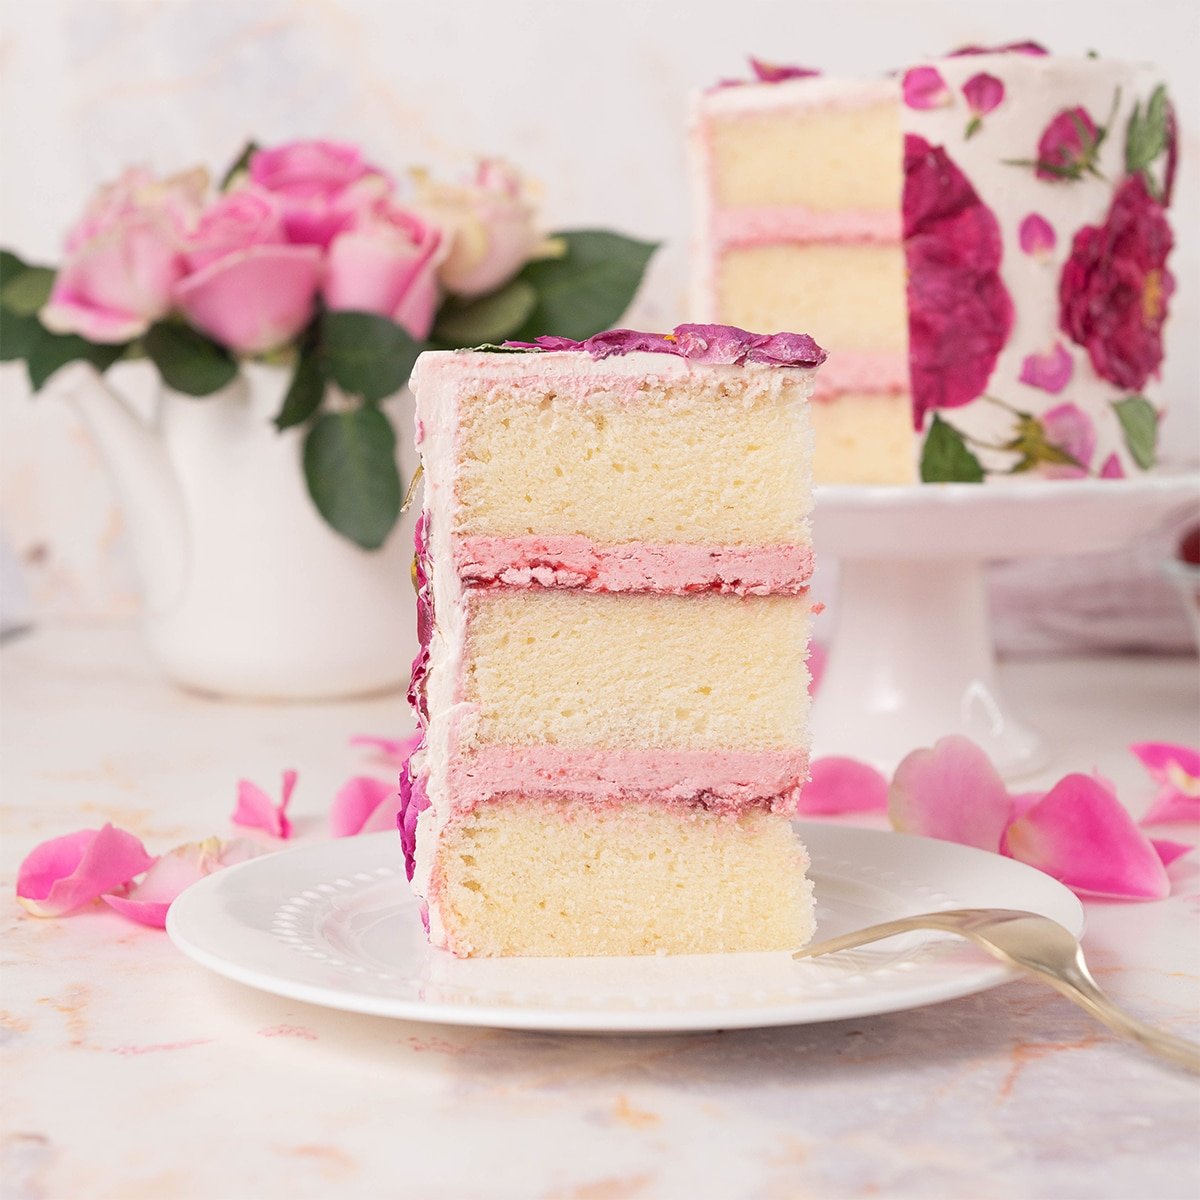 slice of rose cake on a plate